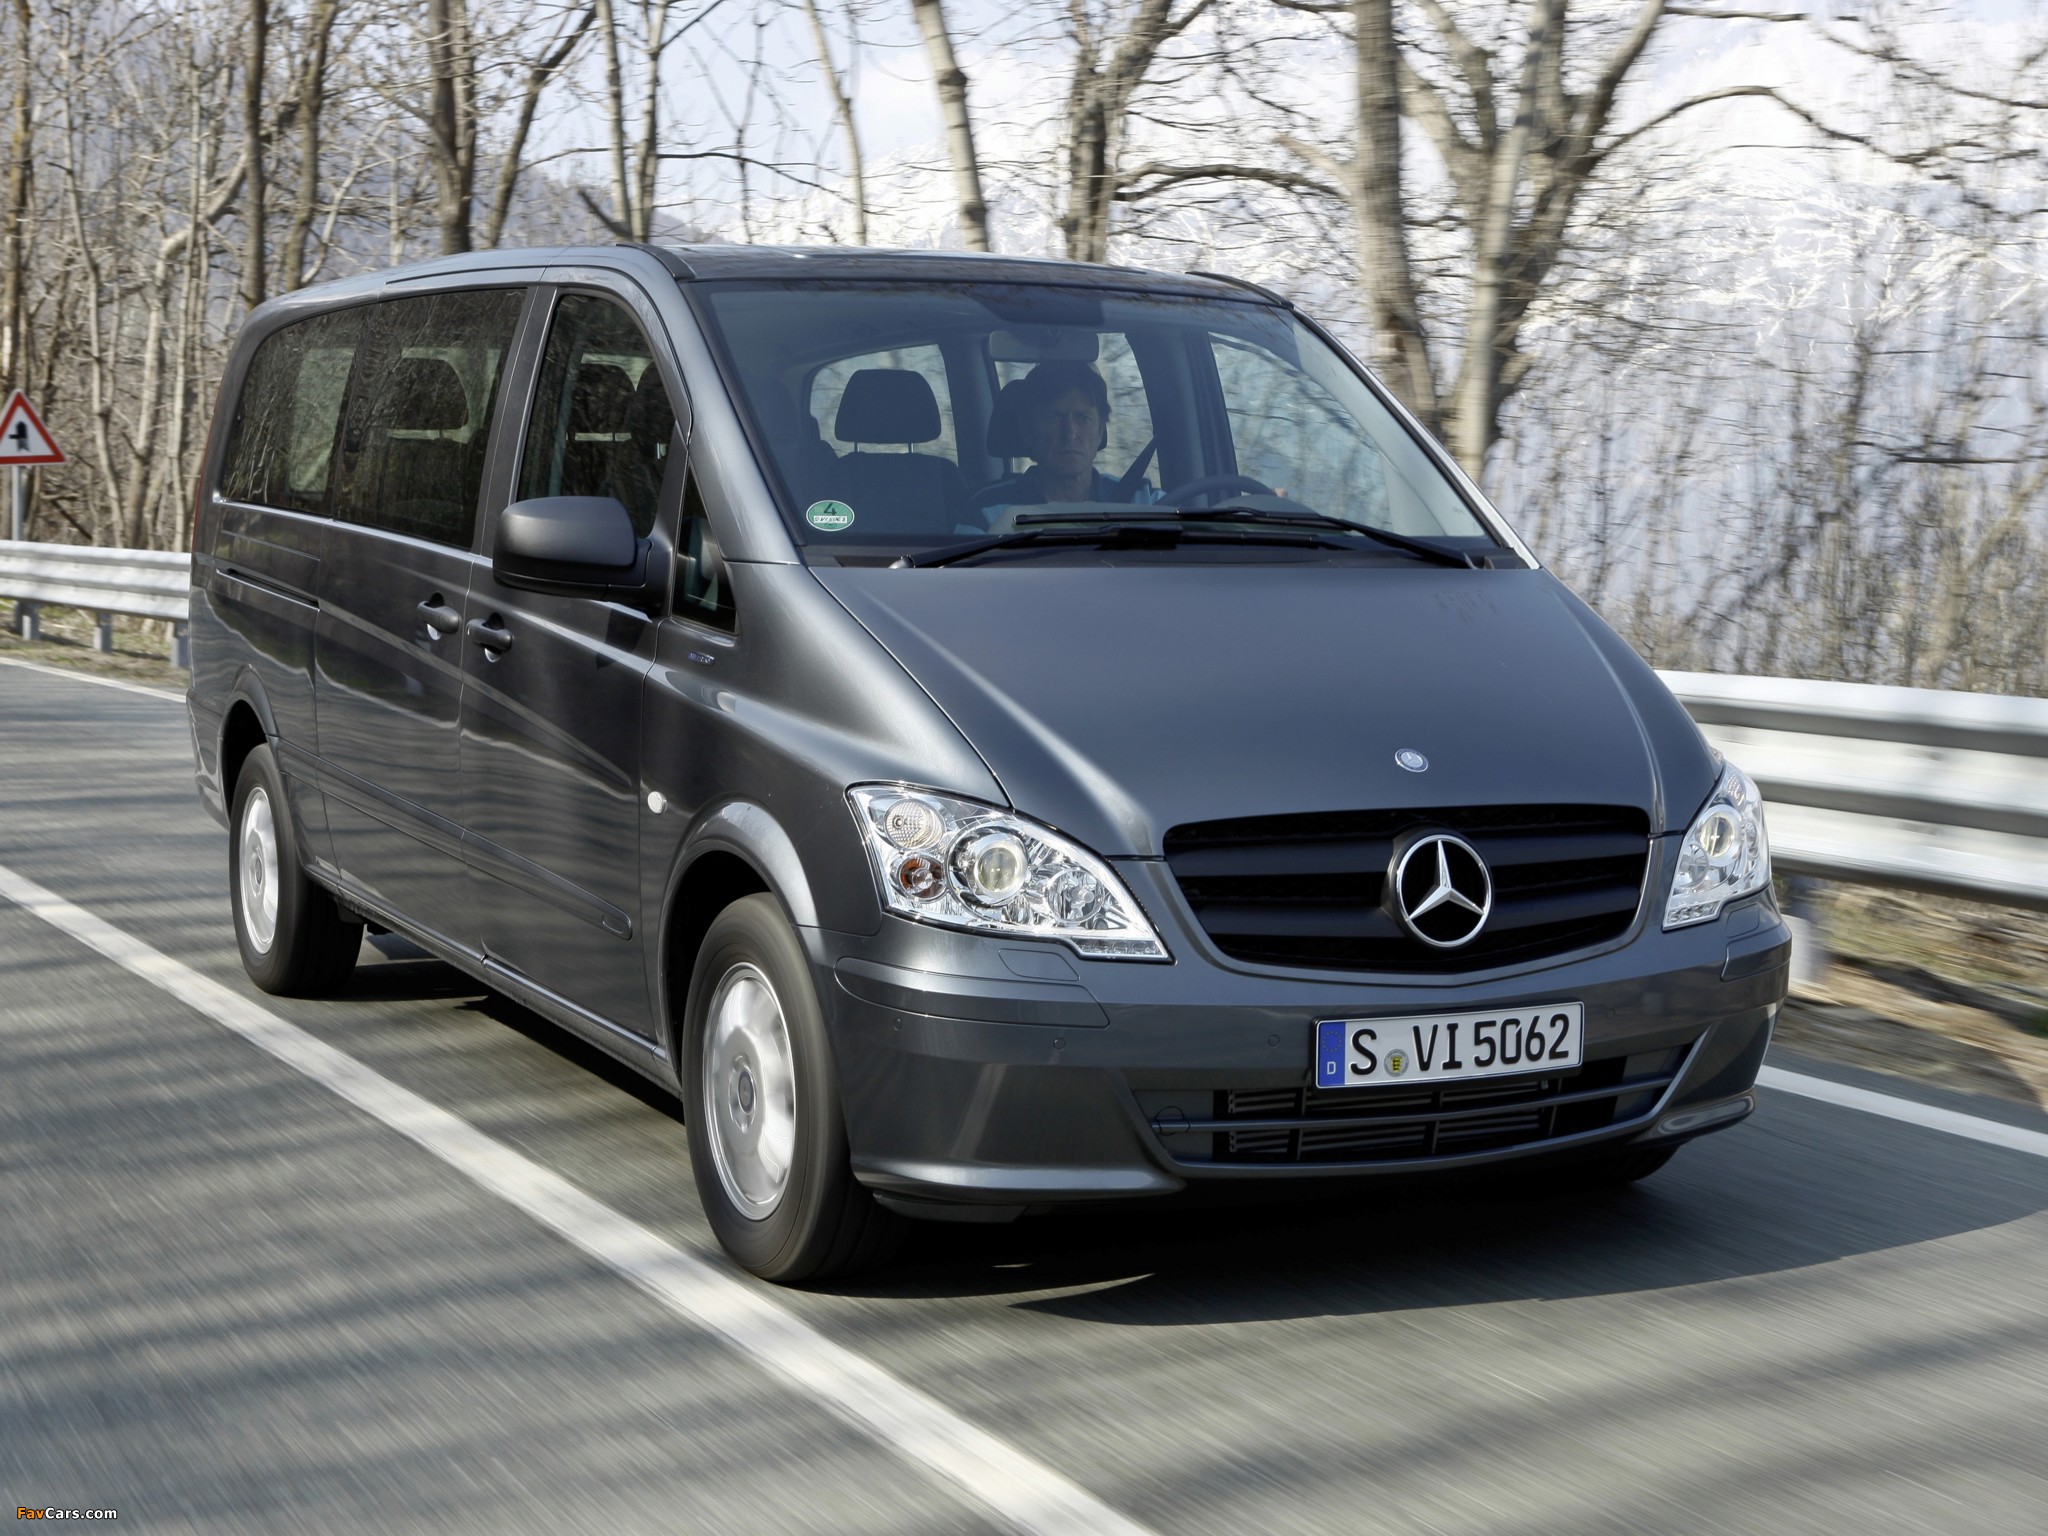 Mercedes-Benz Vito Shuttle (W639) 2011 pictures (2048x1536)